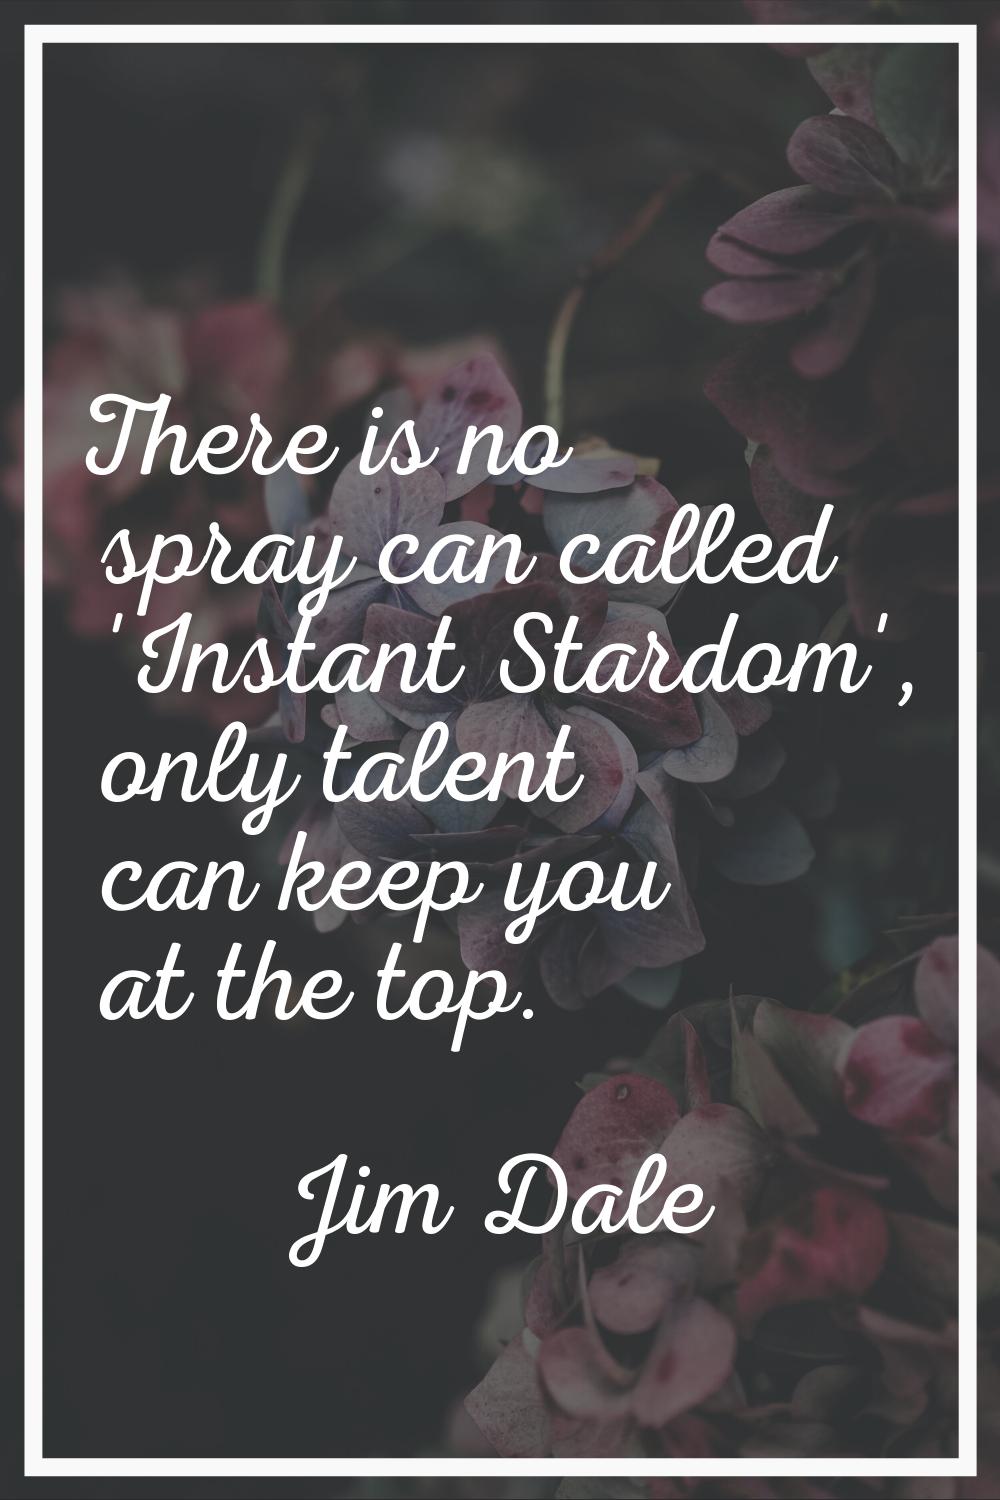 There is no spray can called 'Instant Stardom', only talent can keep you at the top.